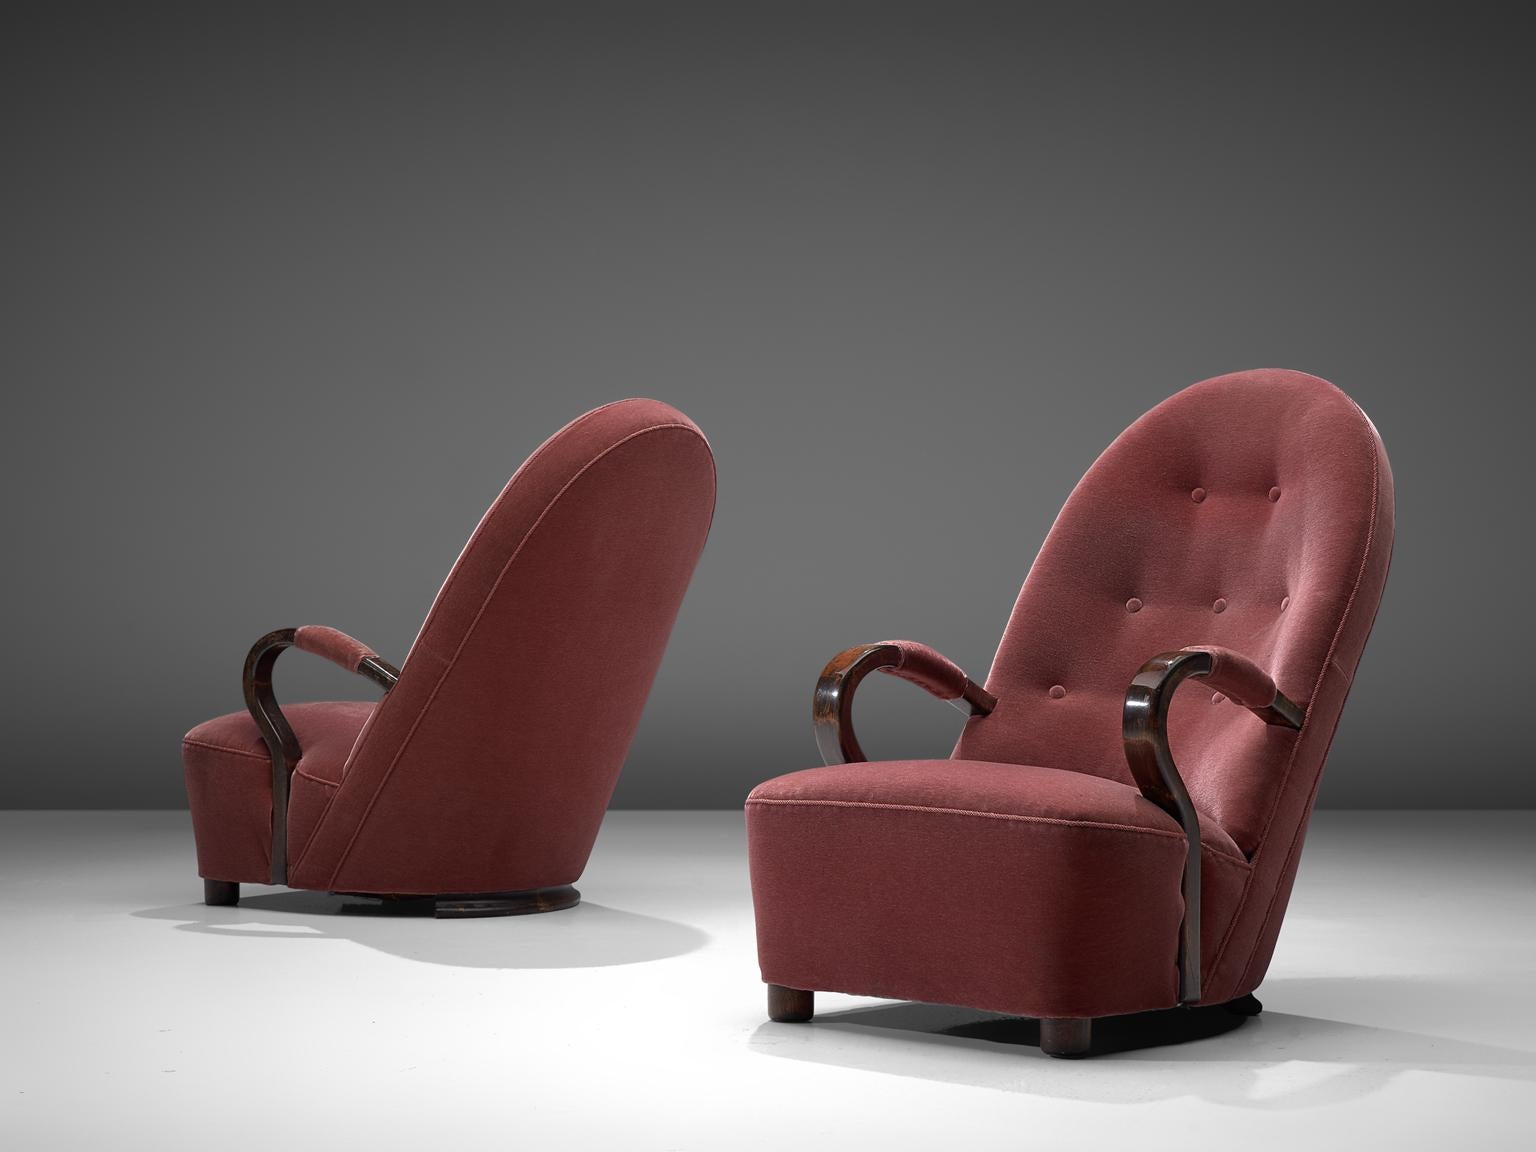 Stained Art Deco Lounge Chairs with Red Upholstery